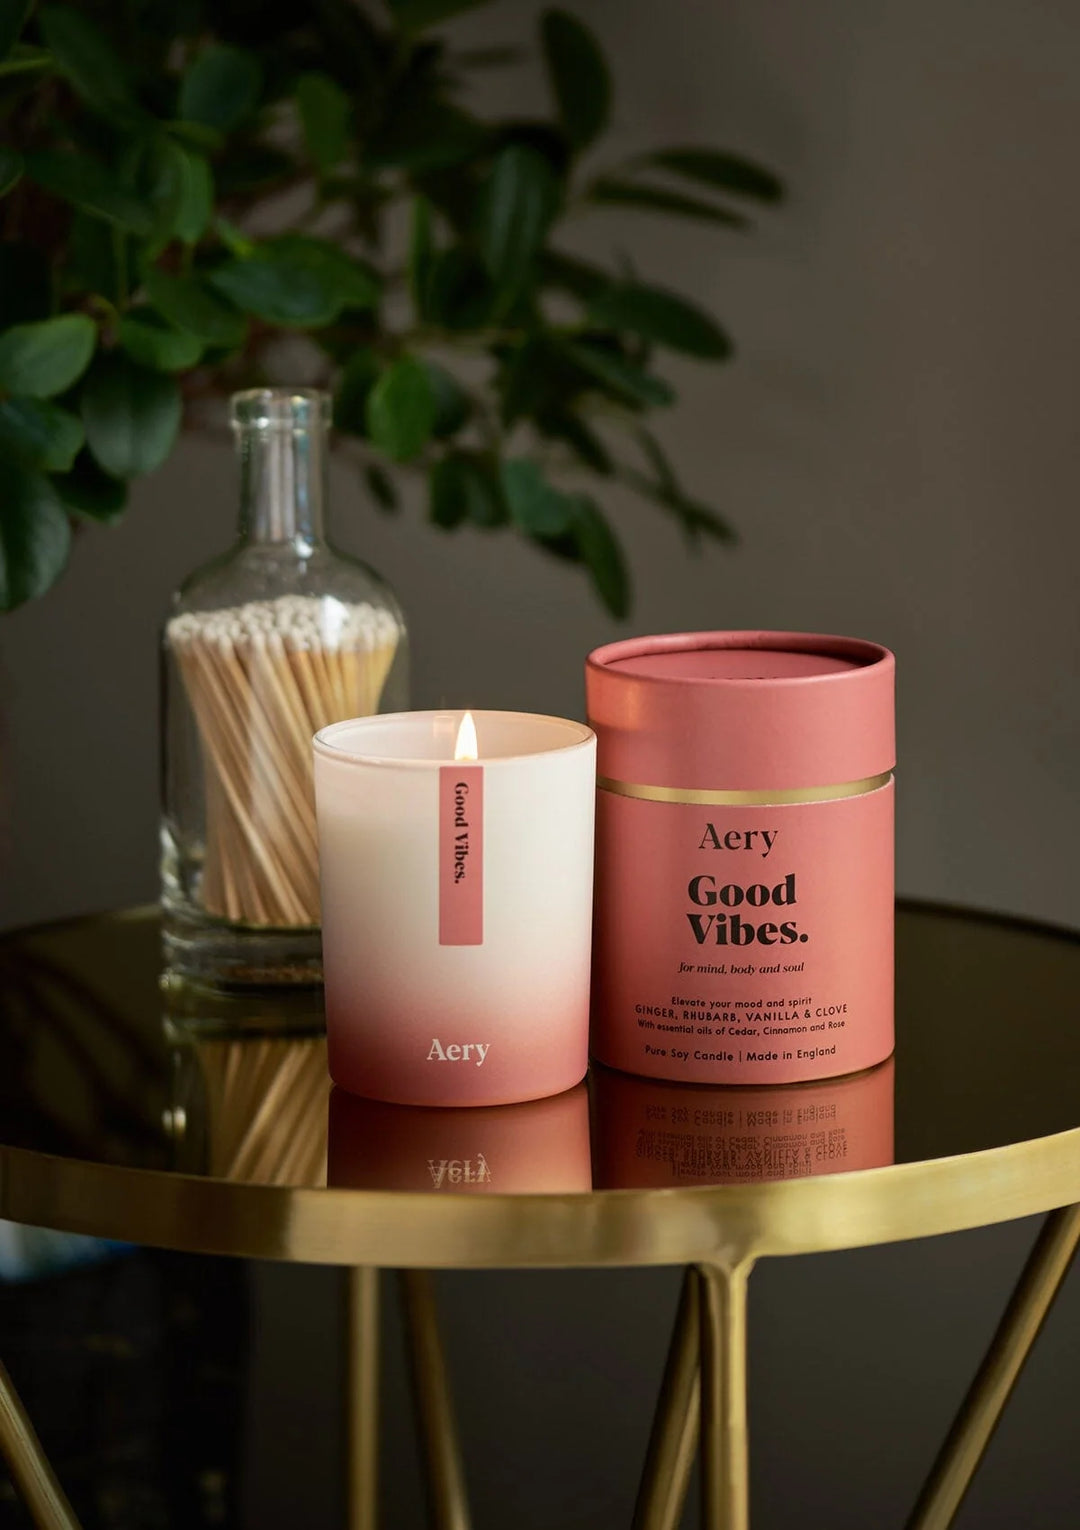 Good Vibes Scented Candle - Ginger & Rhubarb